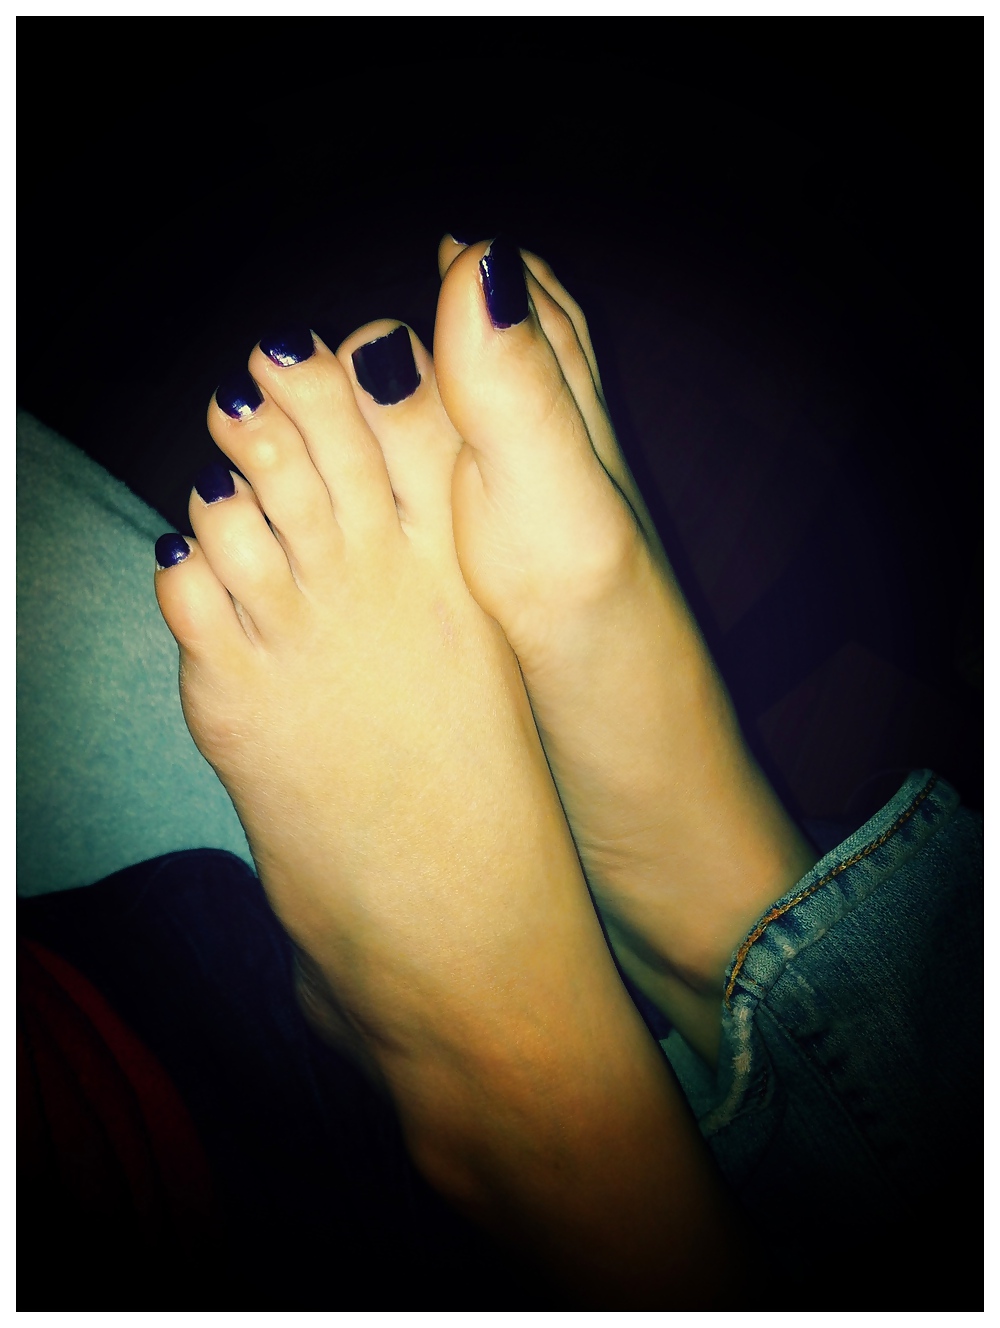 Jackie's dark purple toes and sexy foot
 #14692922